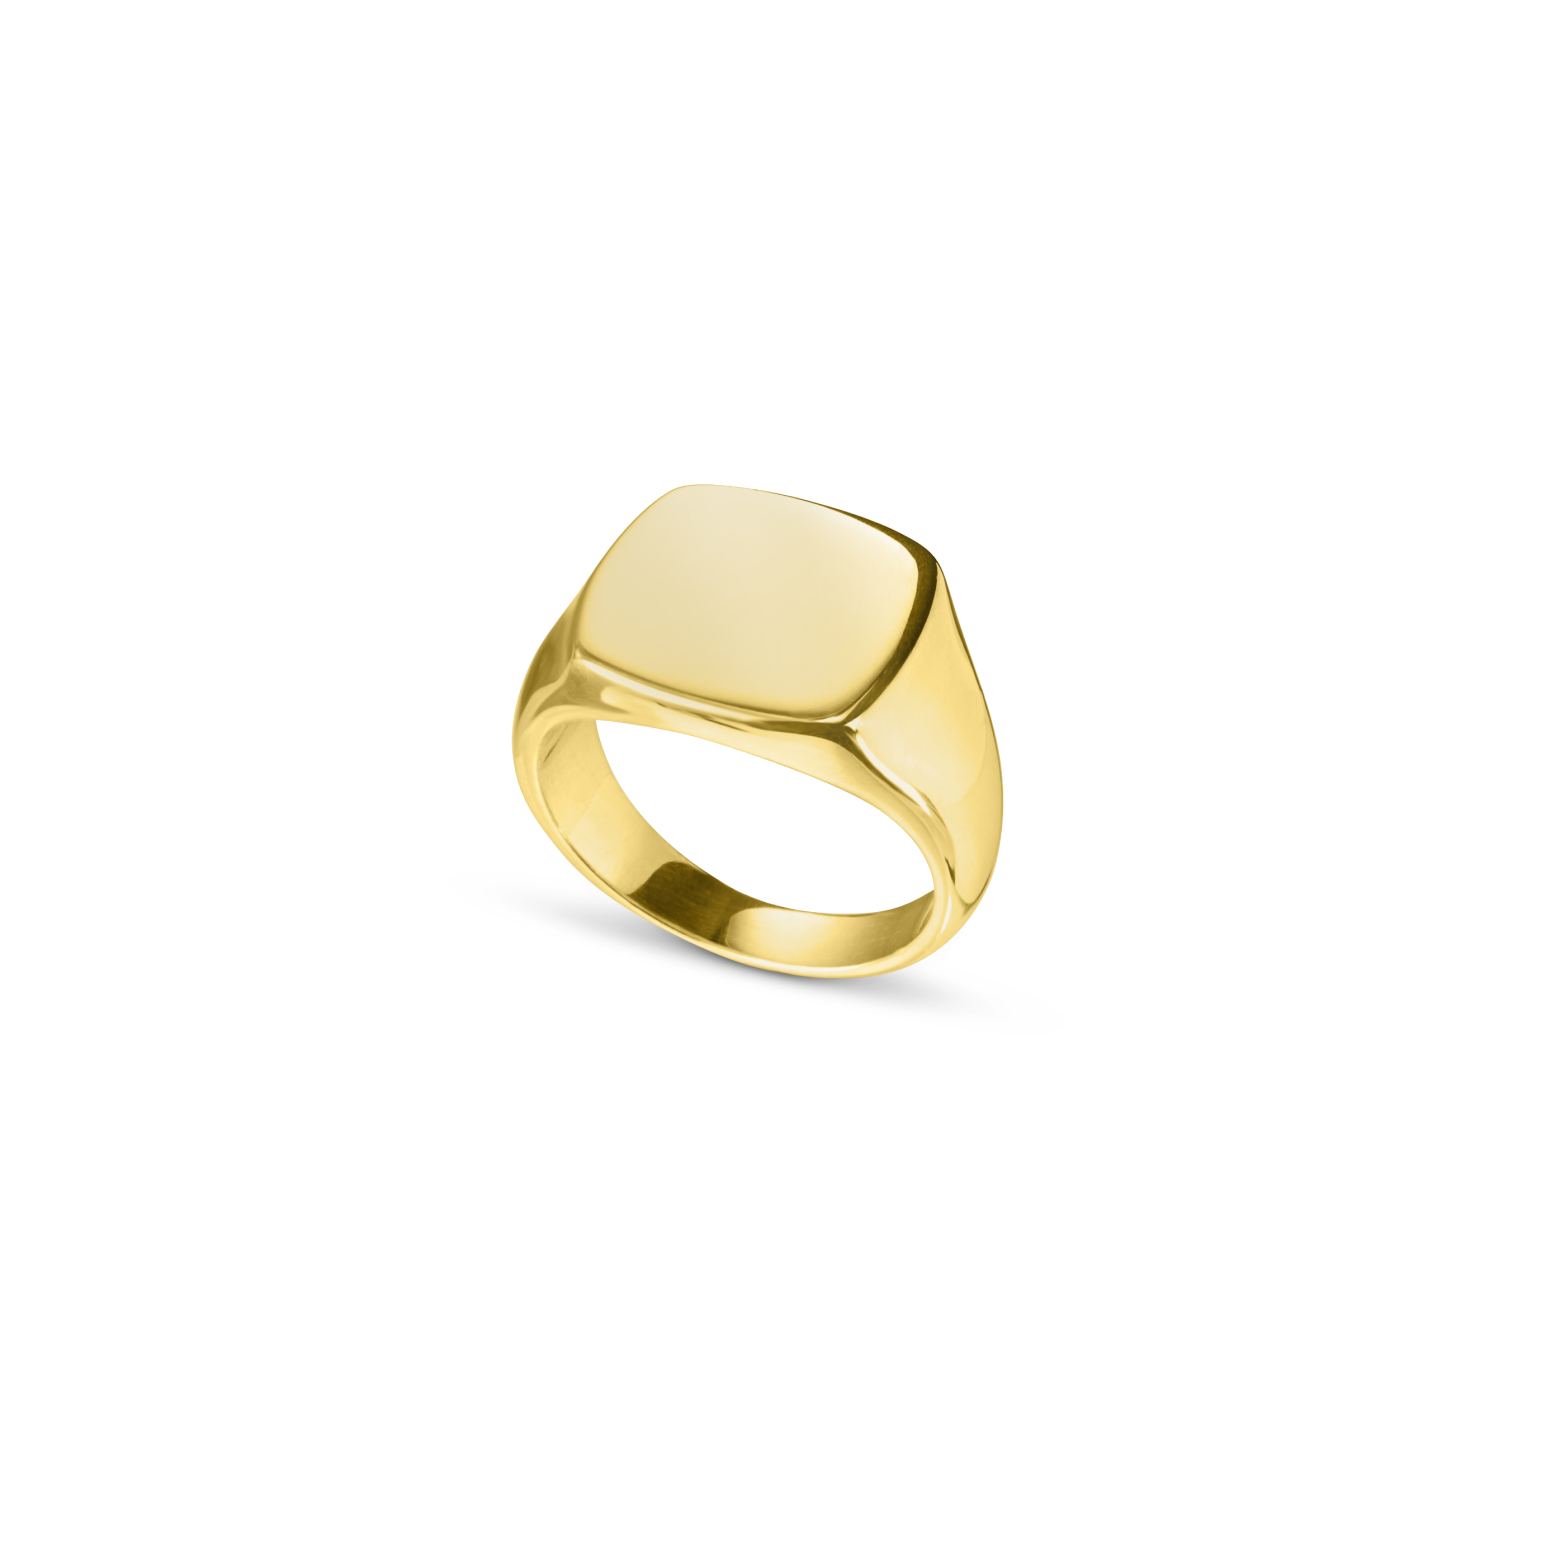 The Cushion Signet Ring